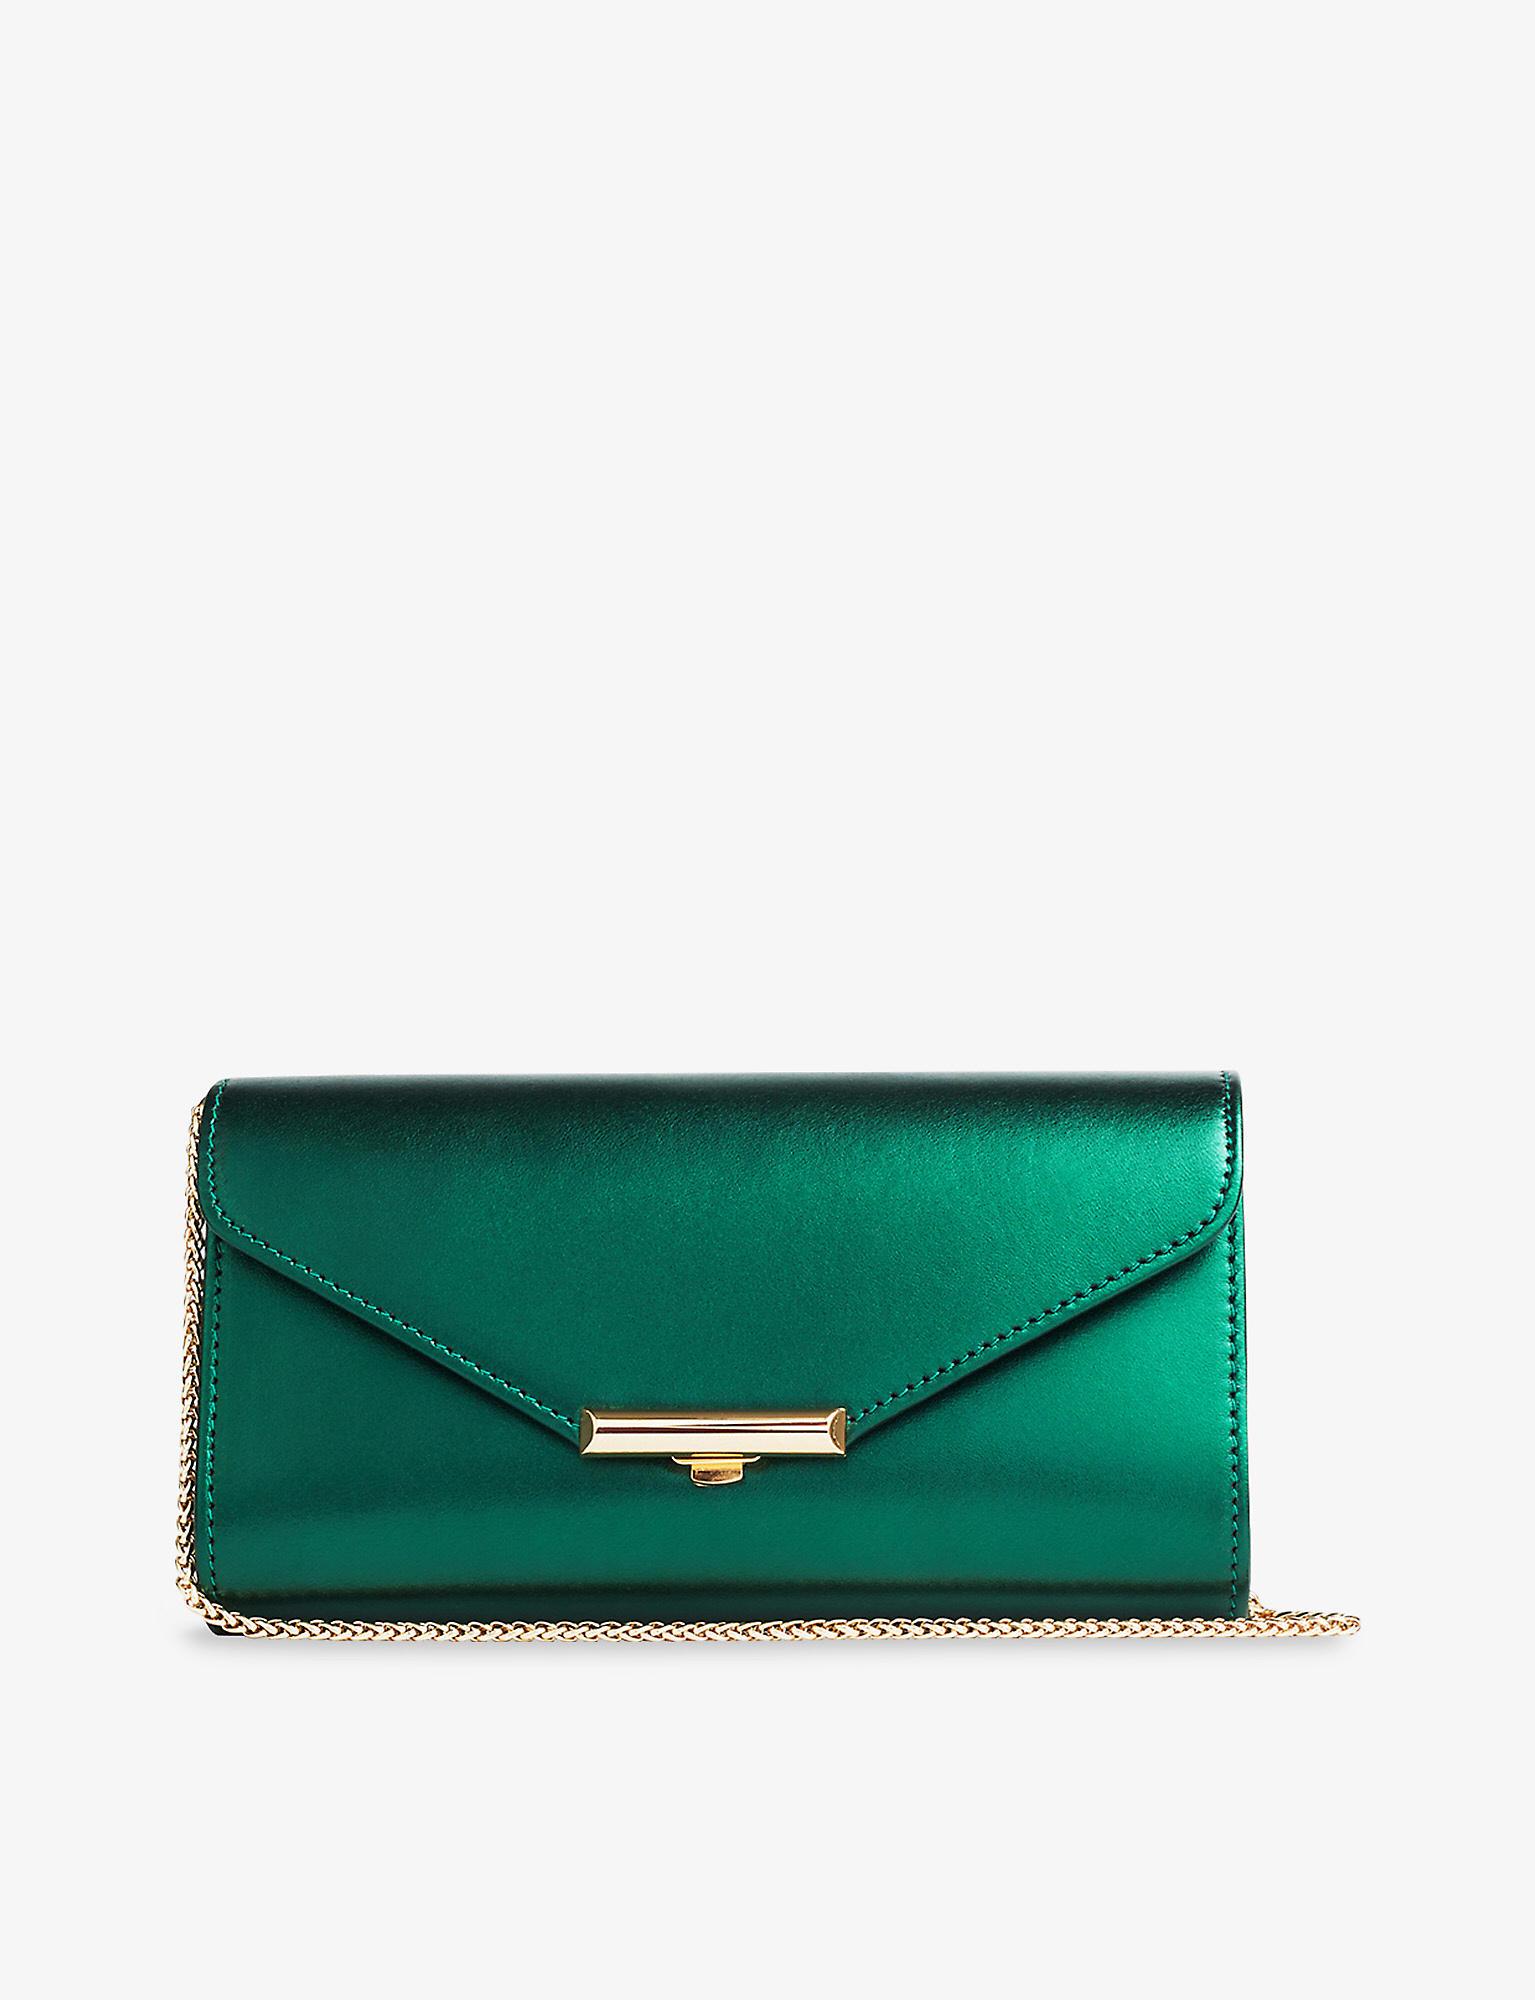 LK Bennett Lucy Flap-top Leather Clutch Bag in Green | Lyst Canada